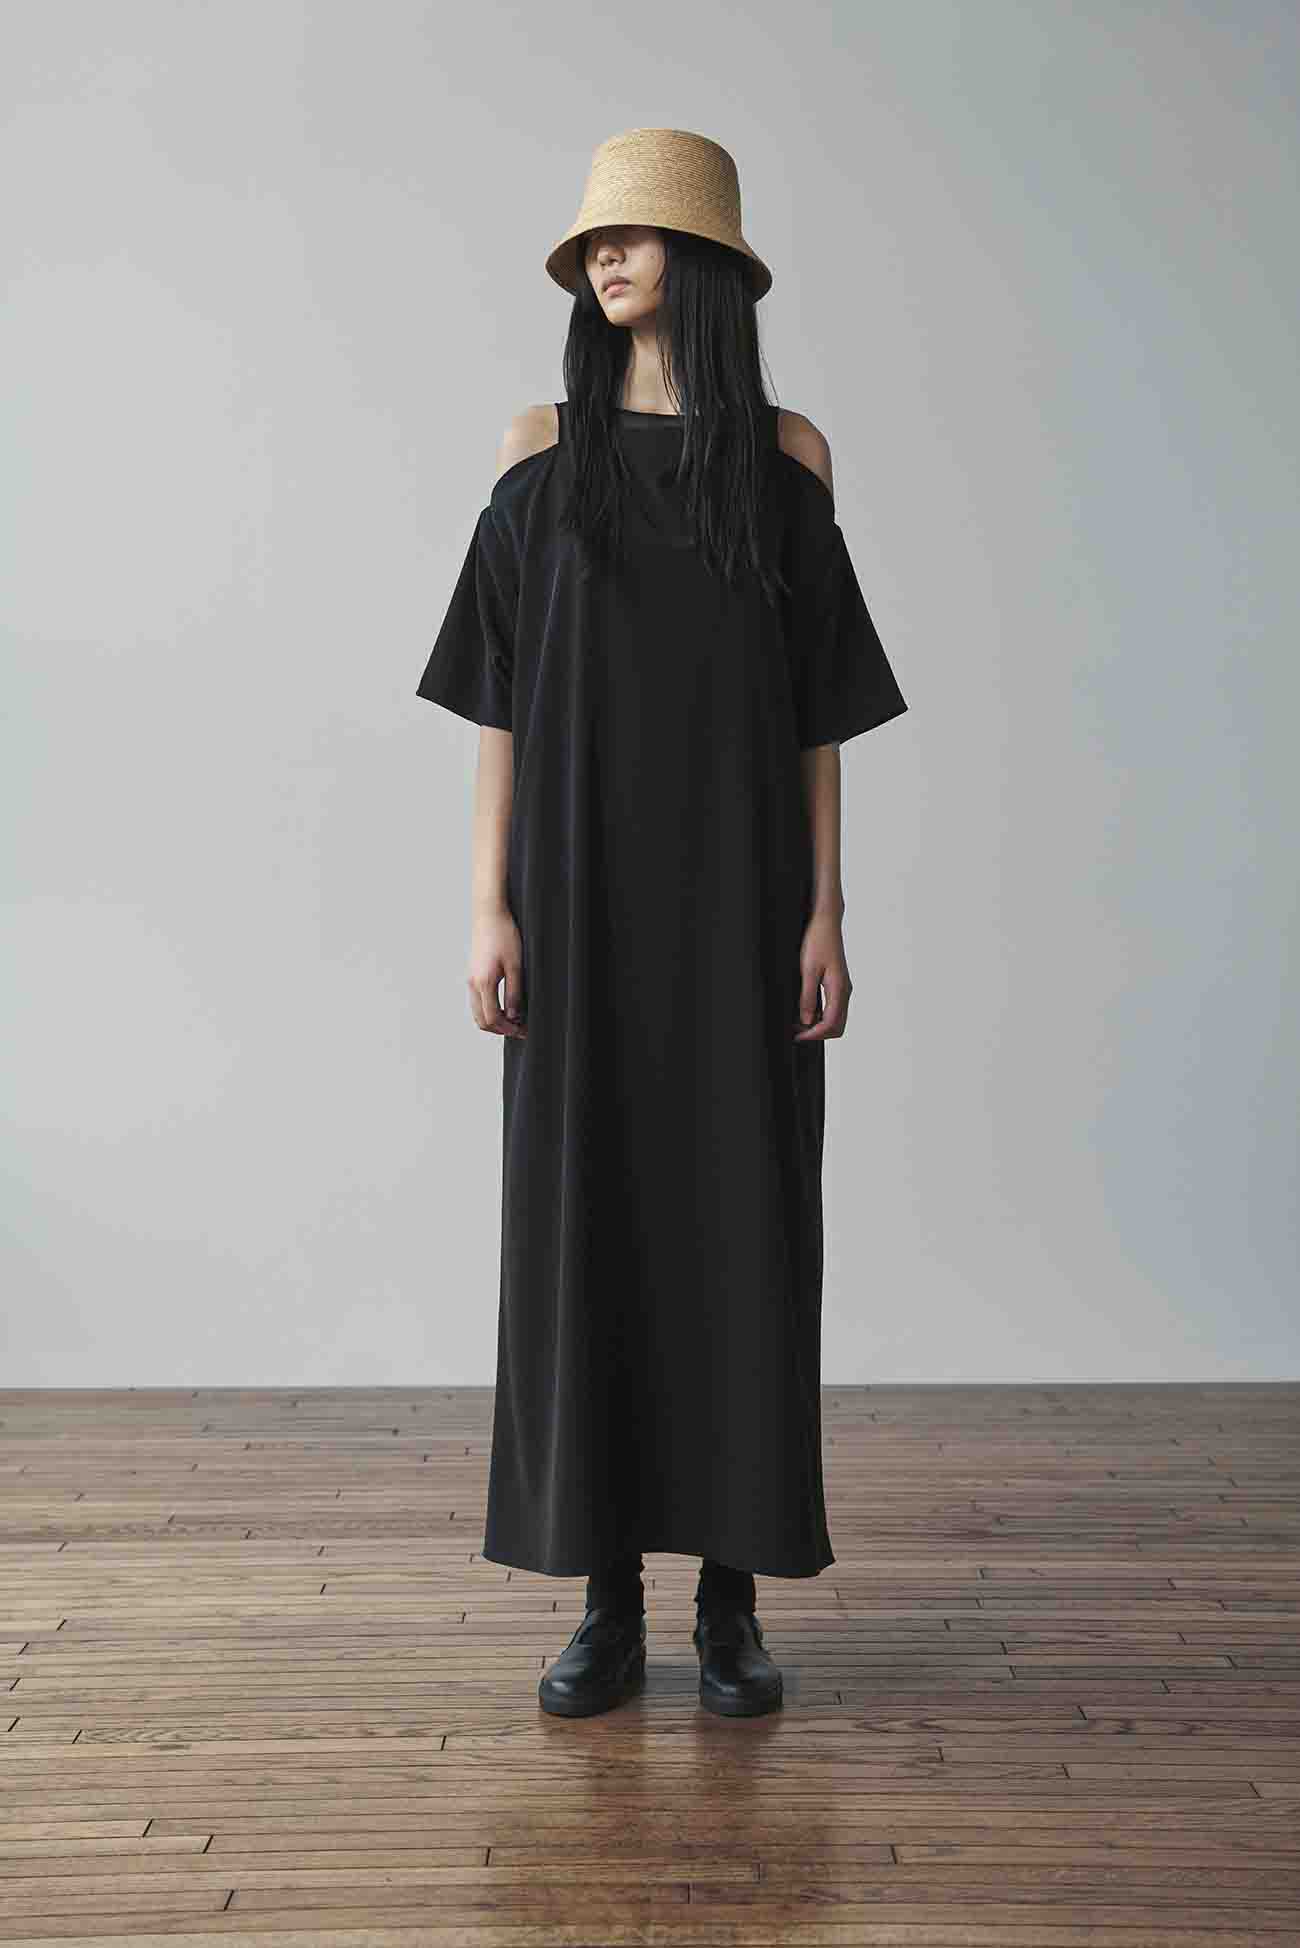 TRIACETATE POLYESTER DOUBLE LAYERED DRESS